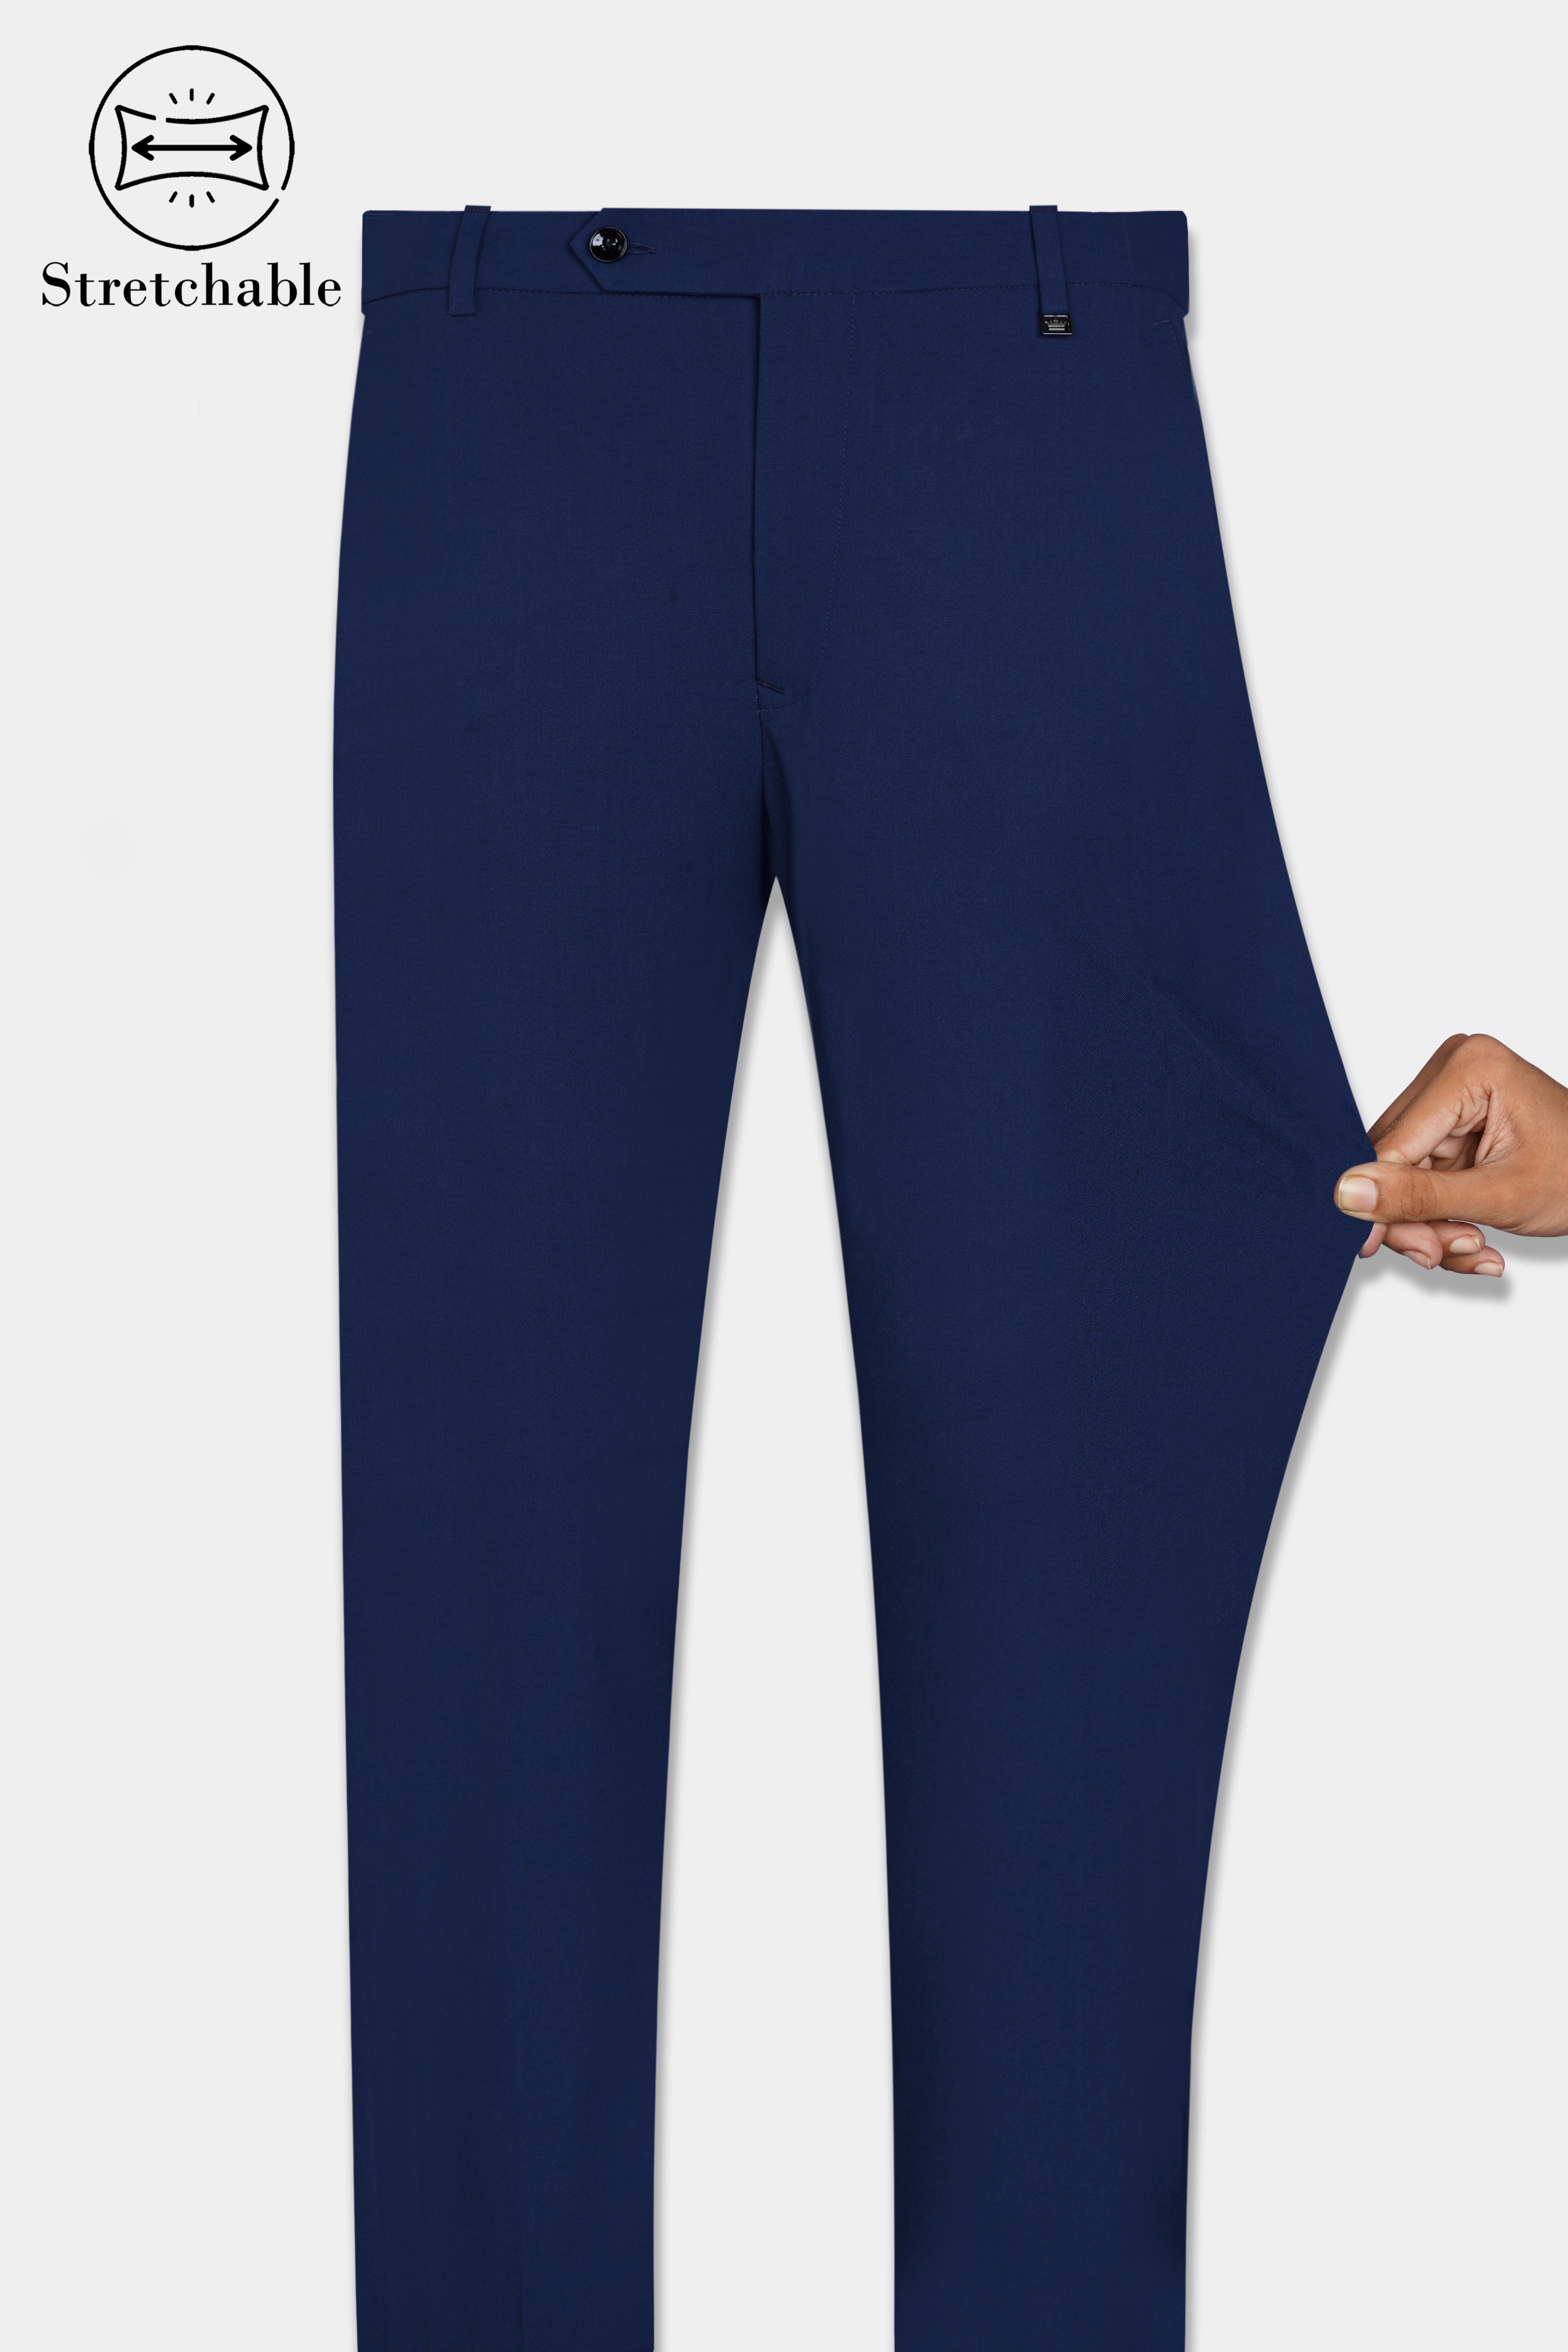 Midnight Blue Wool Rich Stretchable Waistband Pant